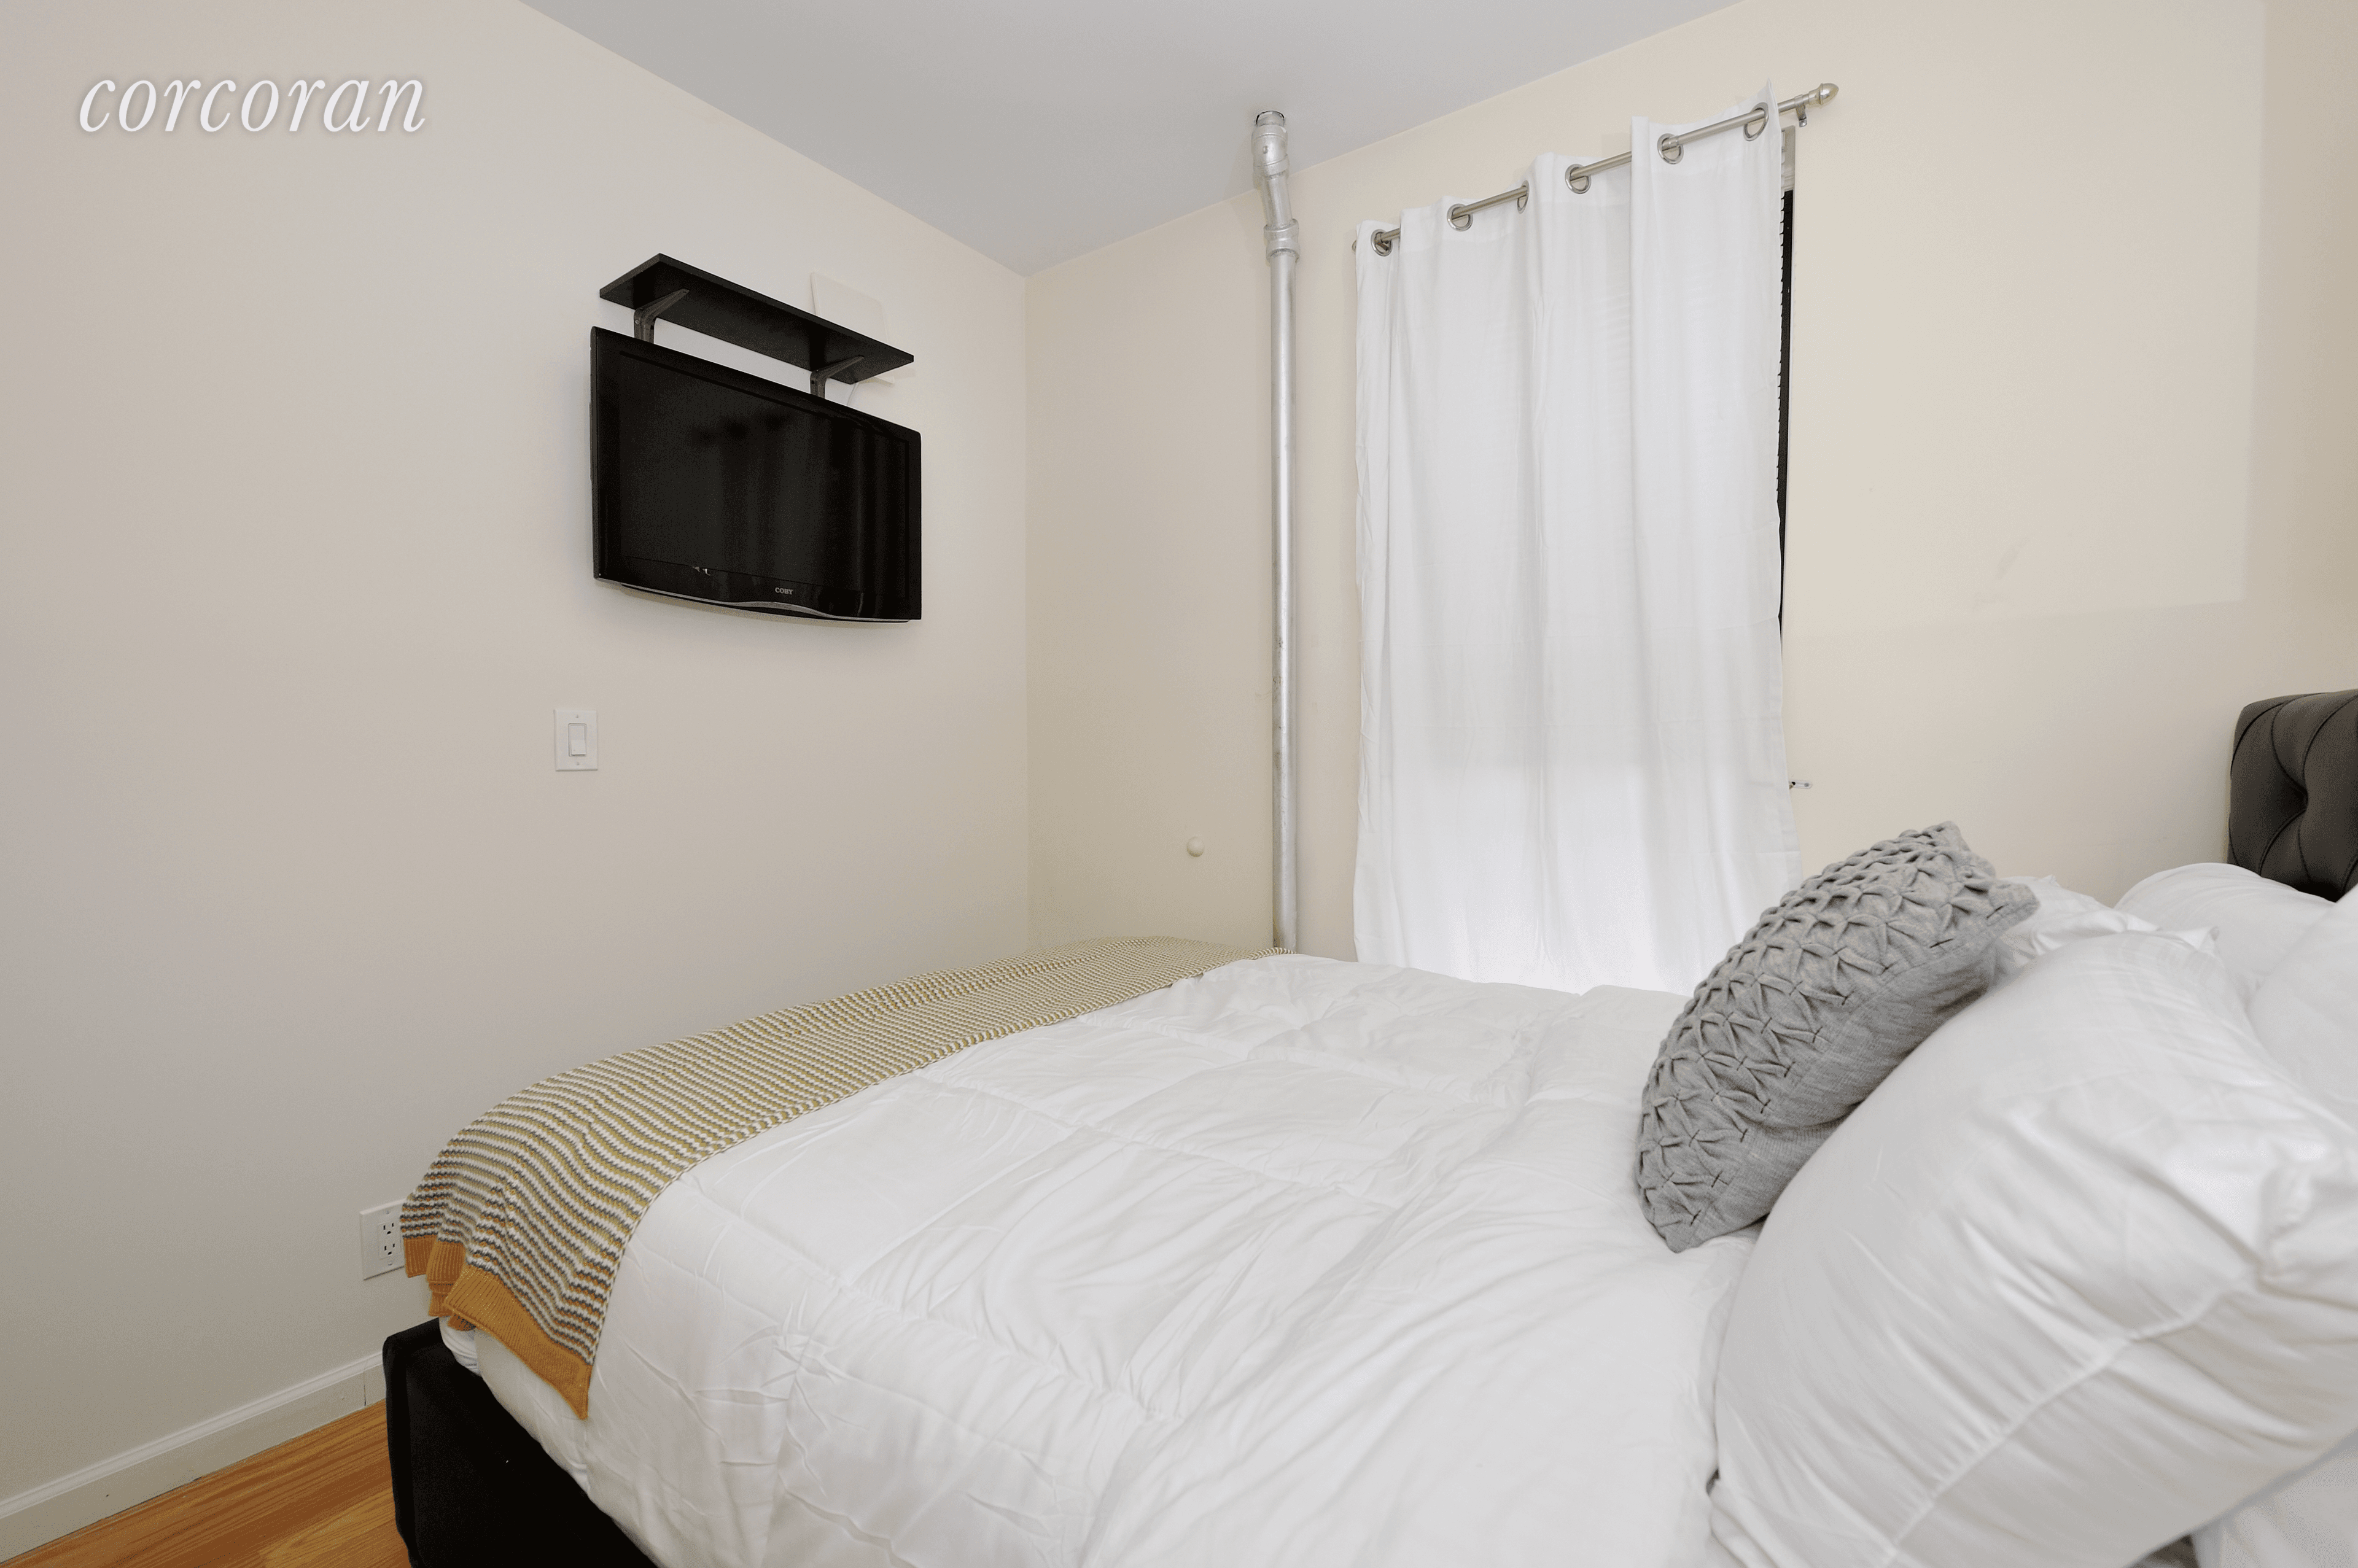 Furnished 4 bedroom apartment in the heart of everything avail 1 to 12 months flat screen tv and wifi ready can come unfurnished if tenant liked full size bedrooms only ...